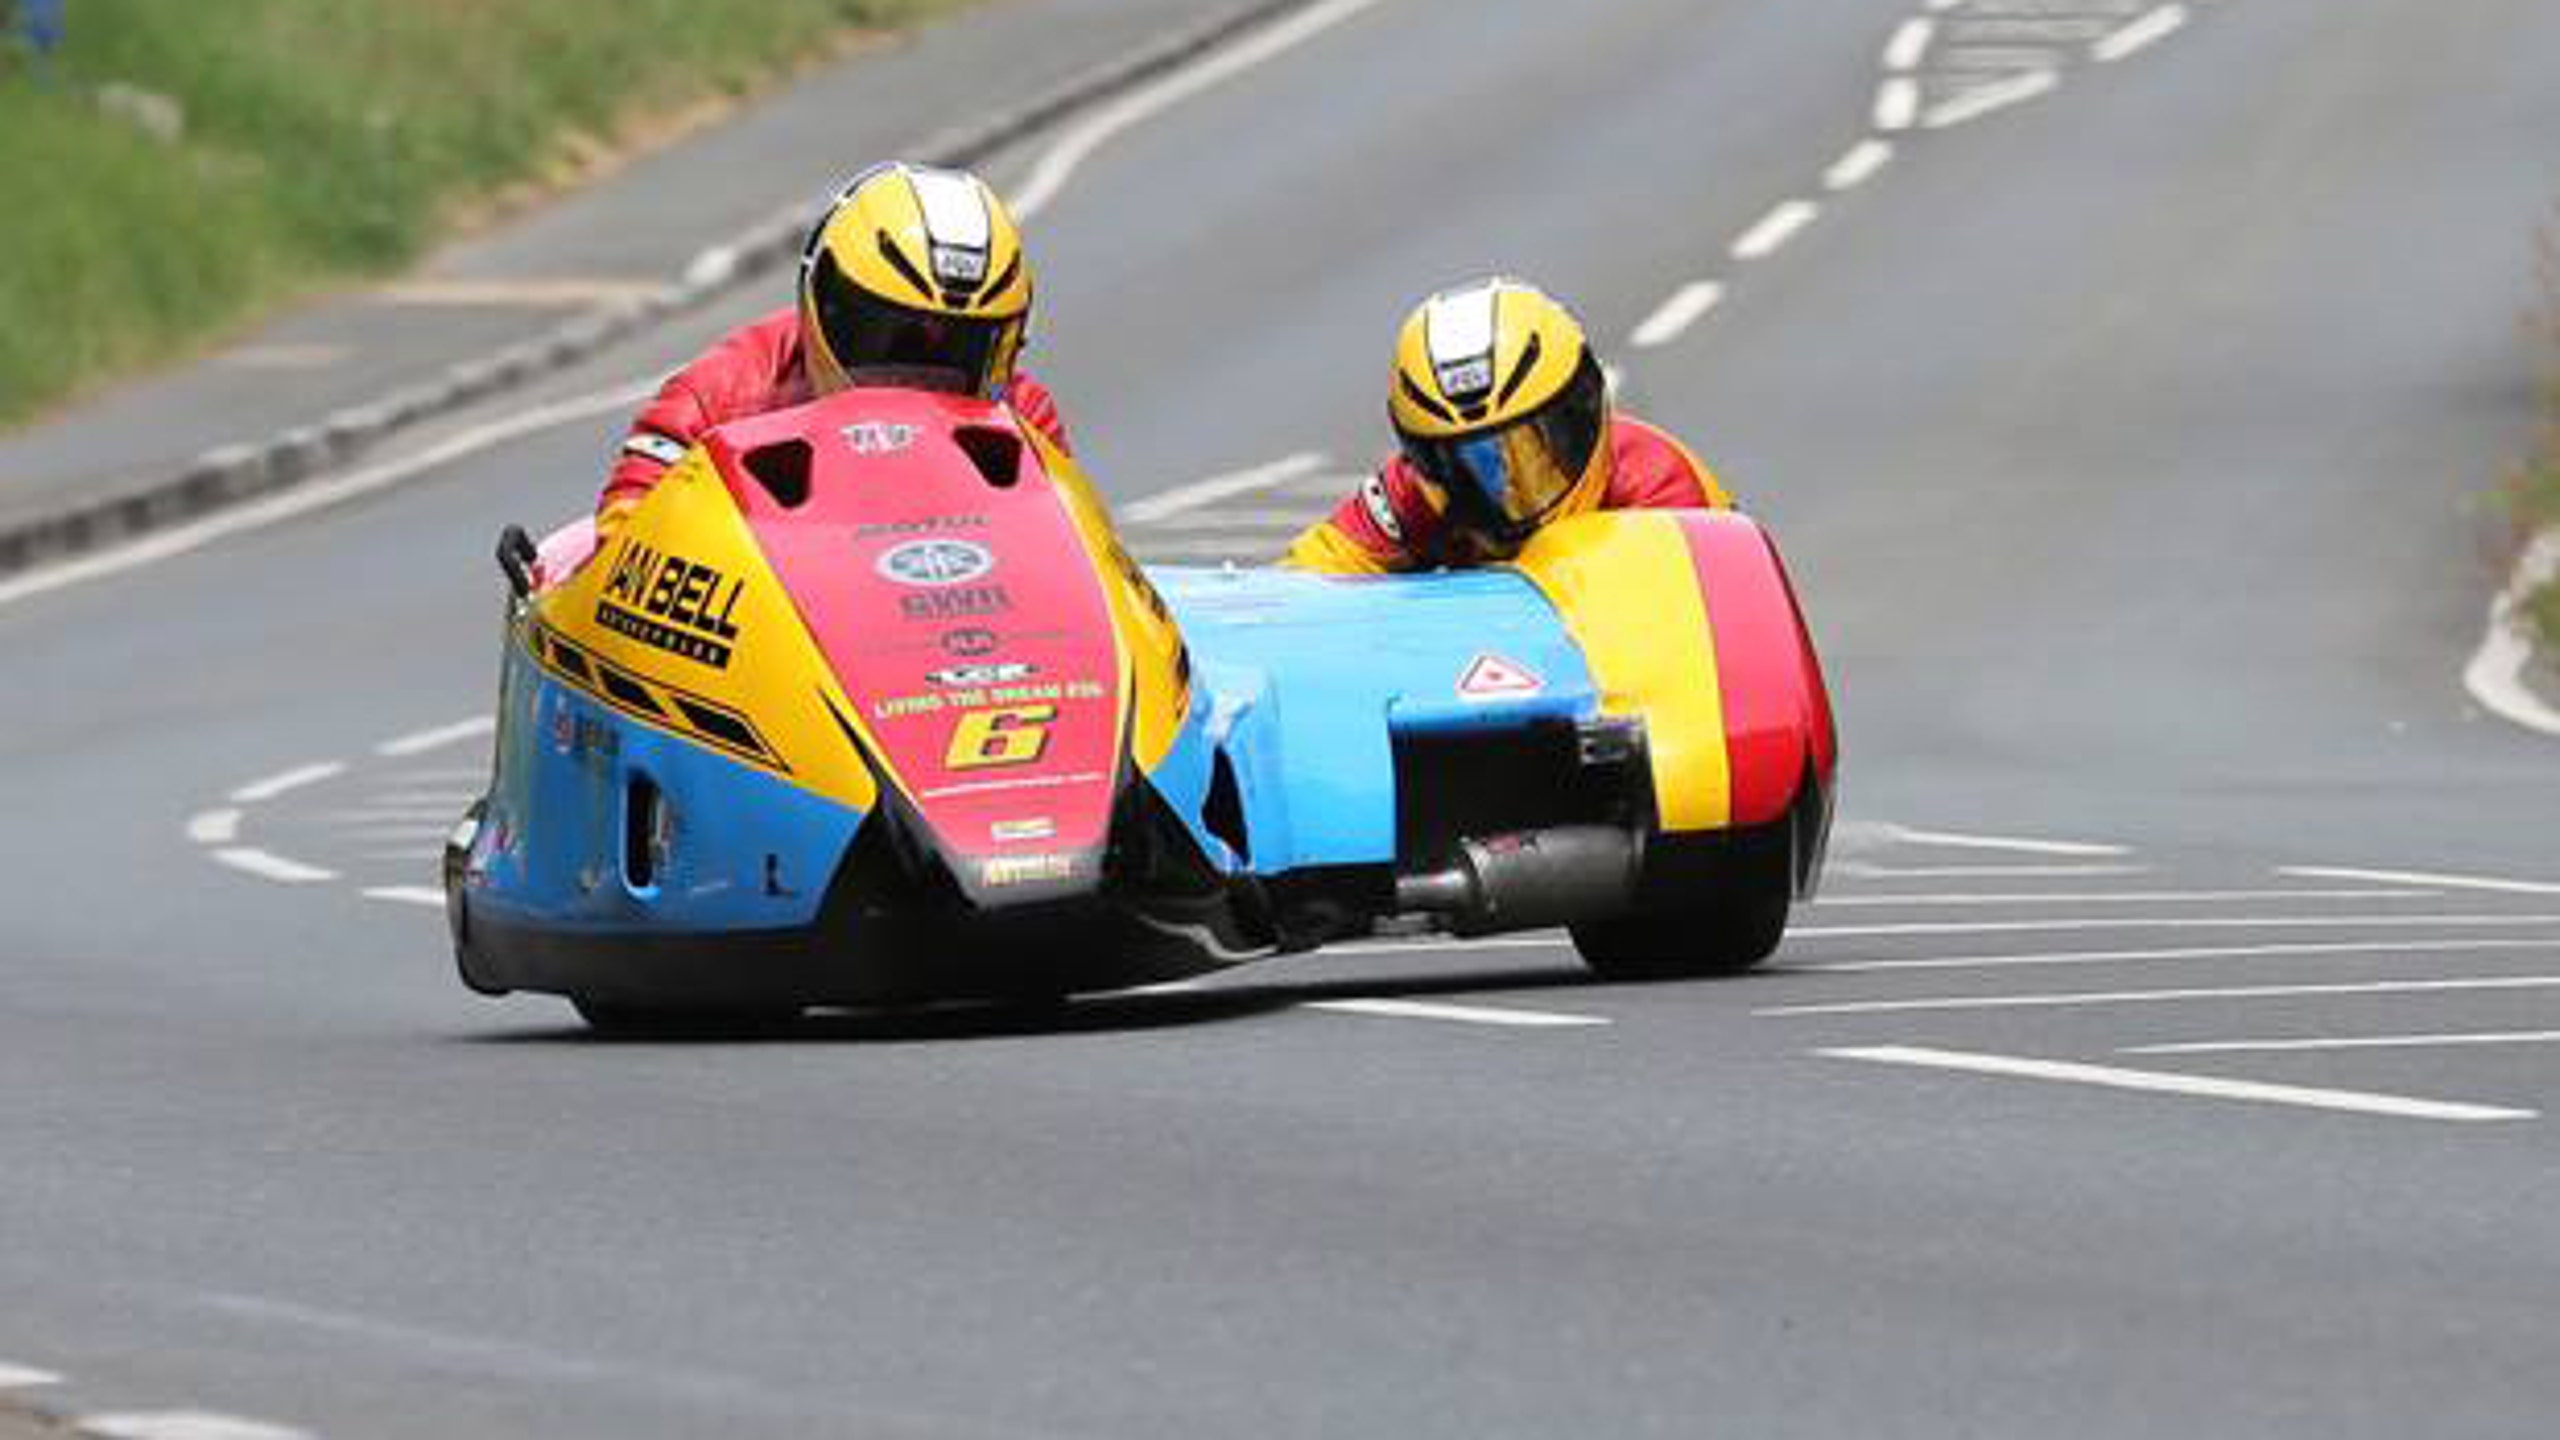 Driver killed during second sidecar race at Isle of Man TT FOX Sports